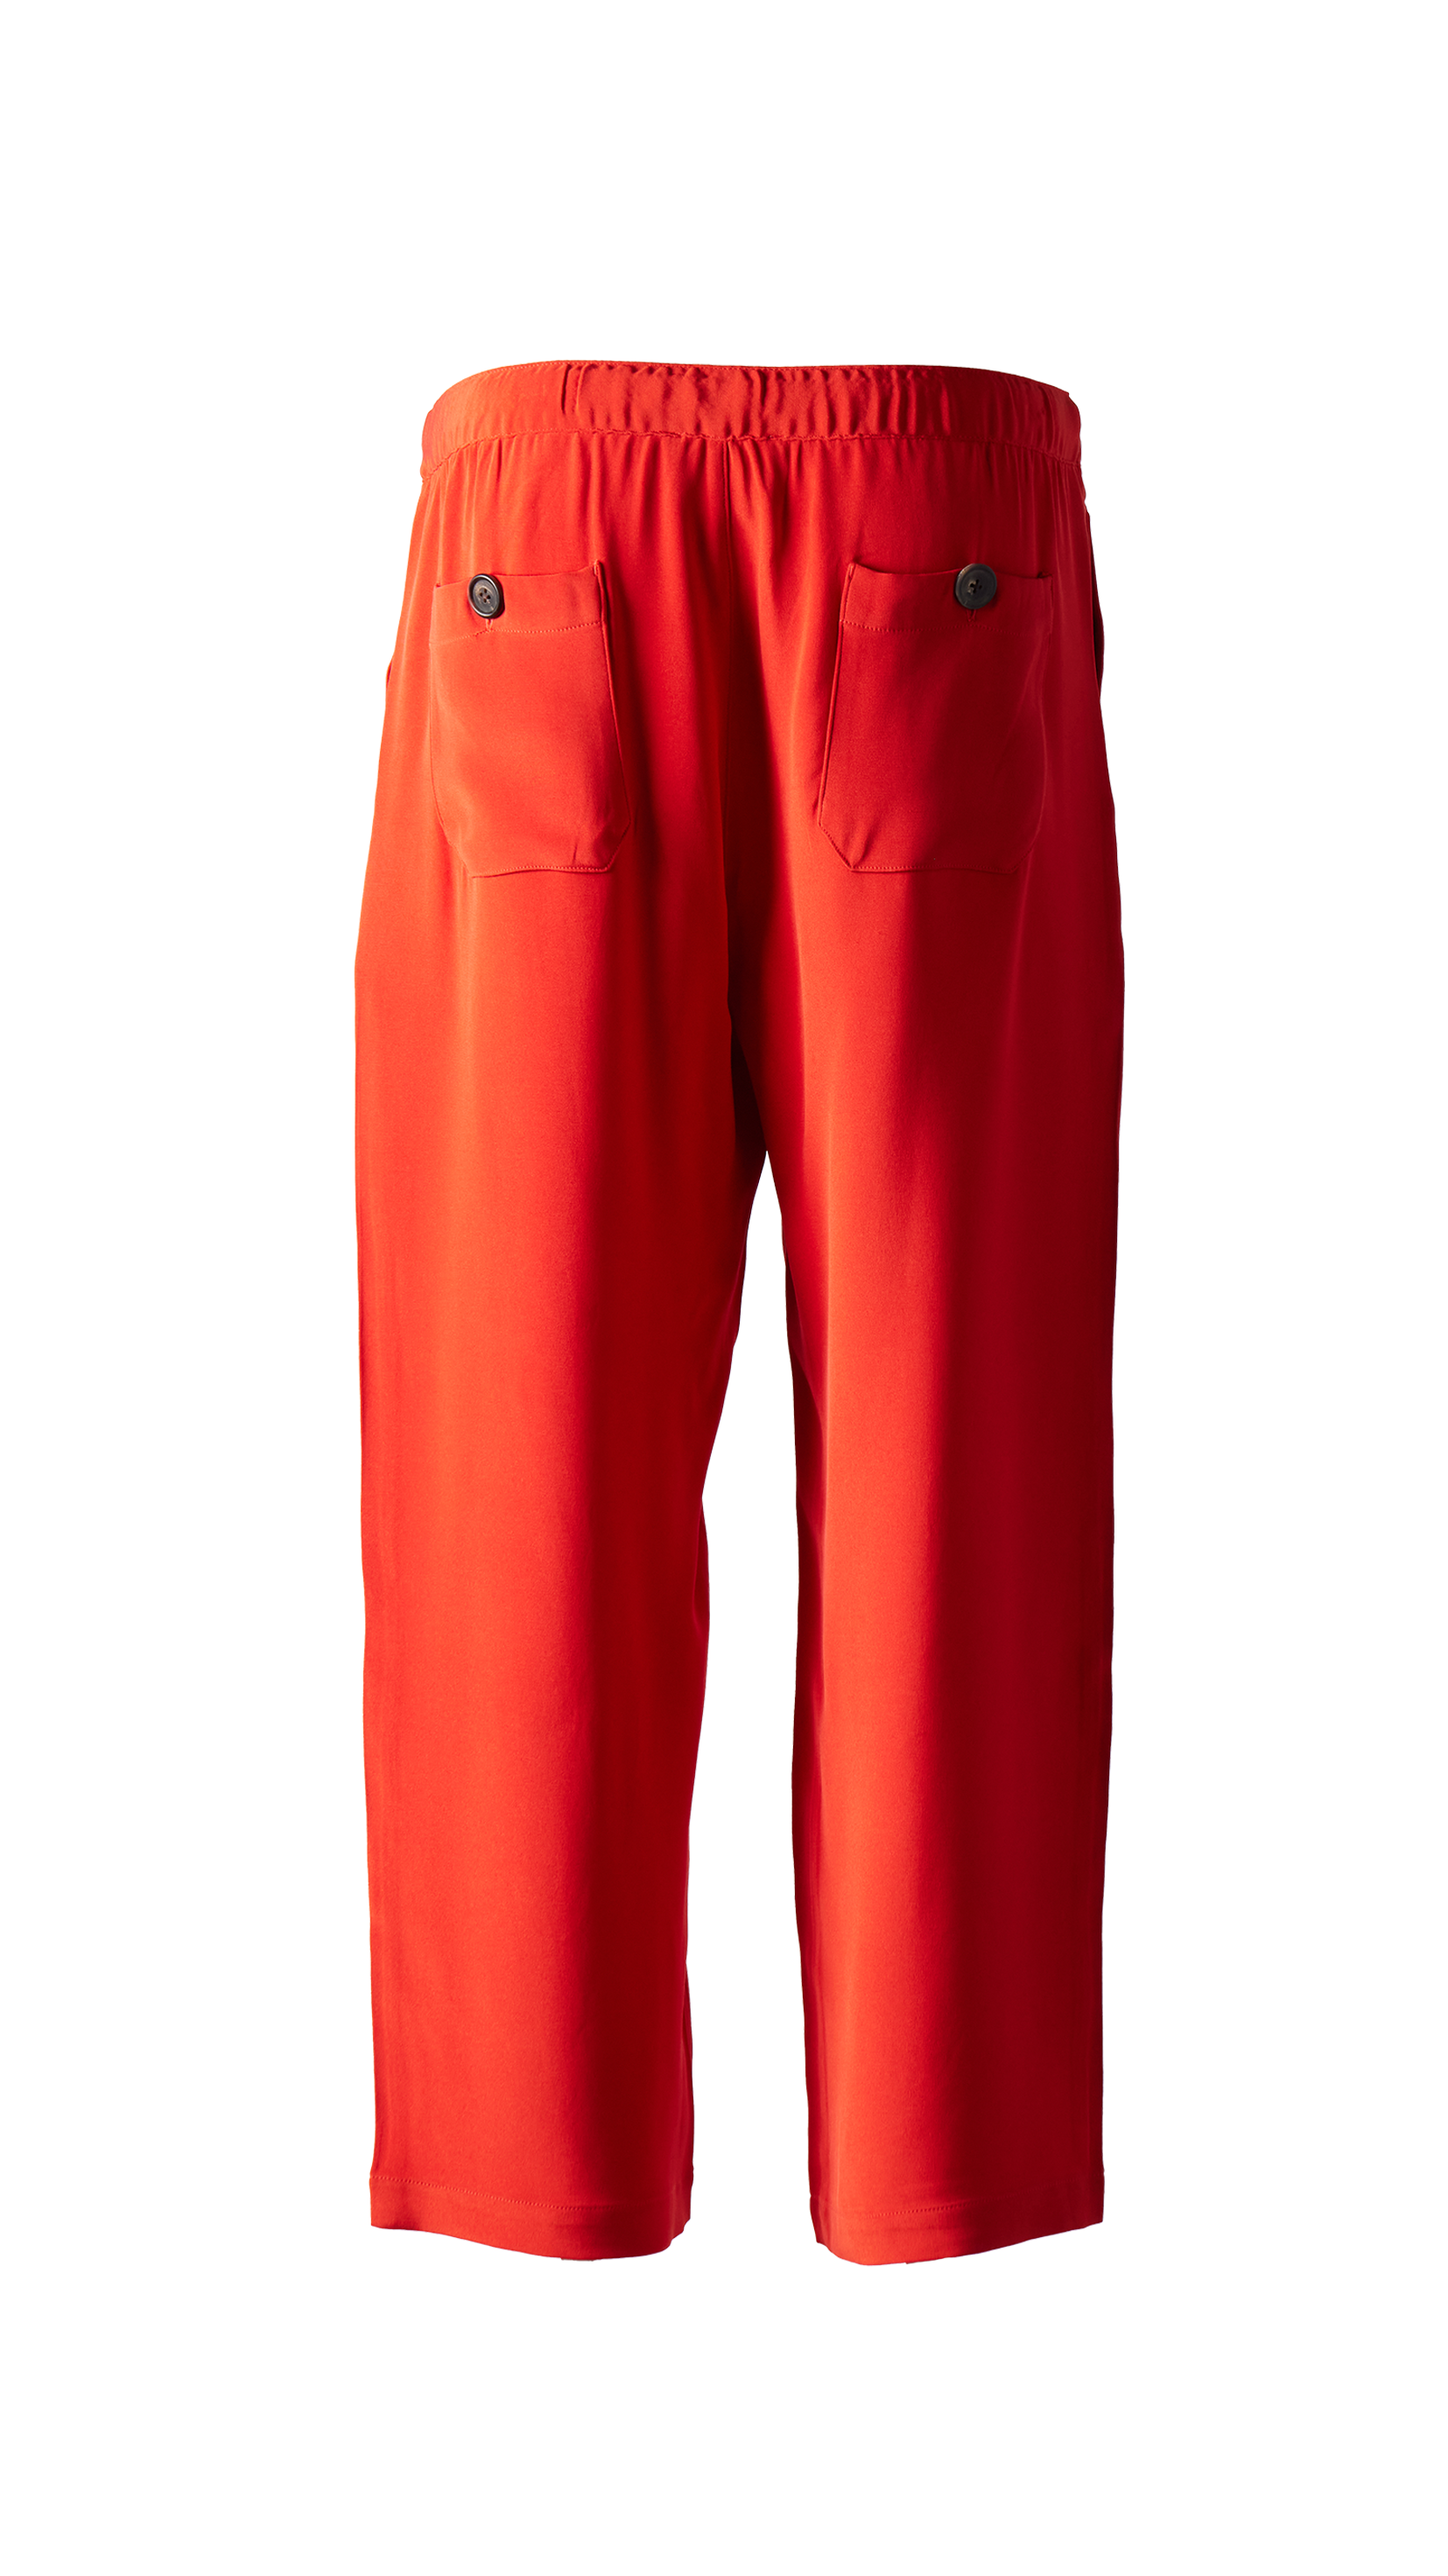 GLASS CYPRESS - Inferno Silk Trousers product image